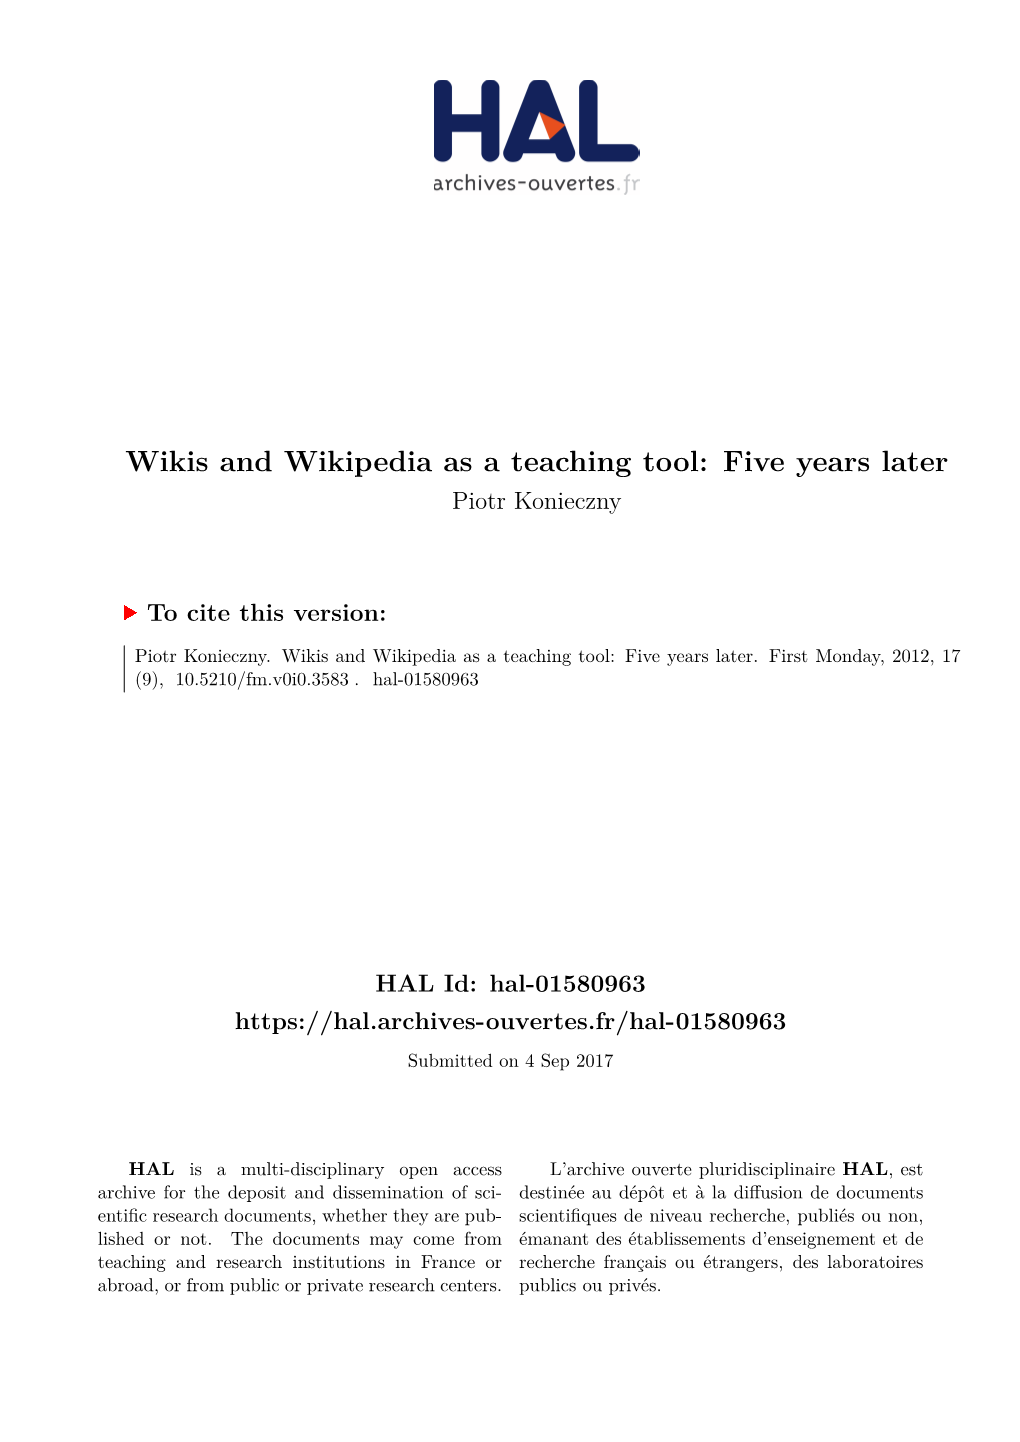 Wikis and Wikipedia As a Teaching Tool: Five Years Later Piotr Konieczny